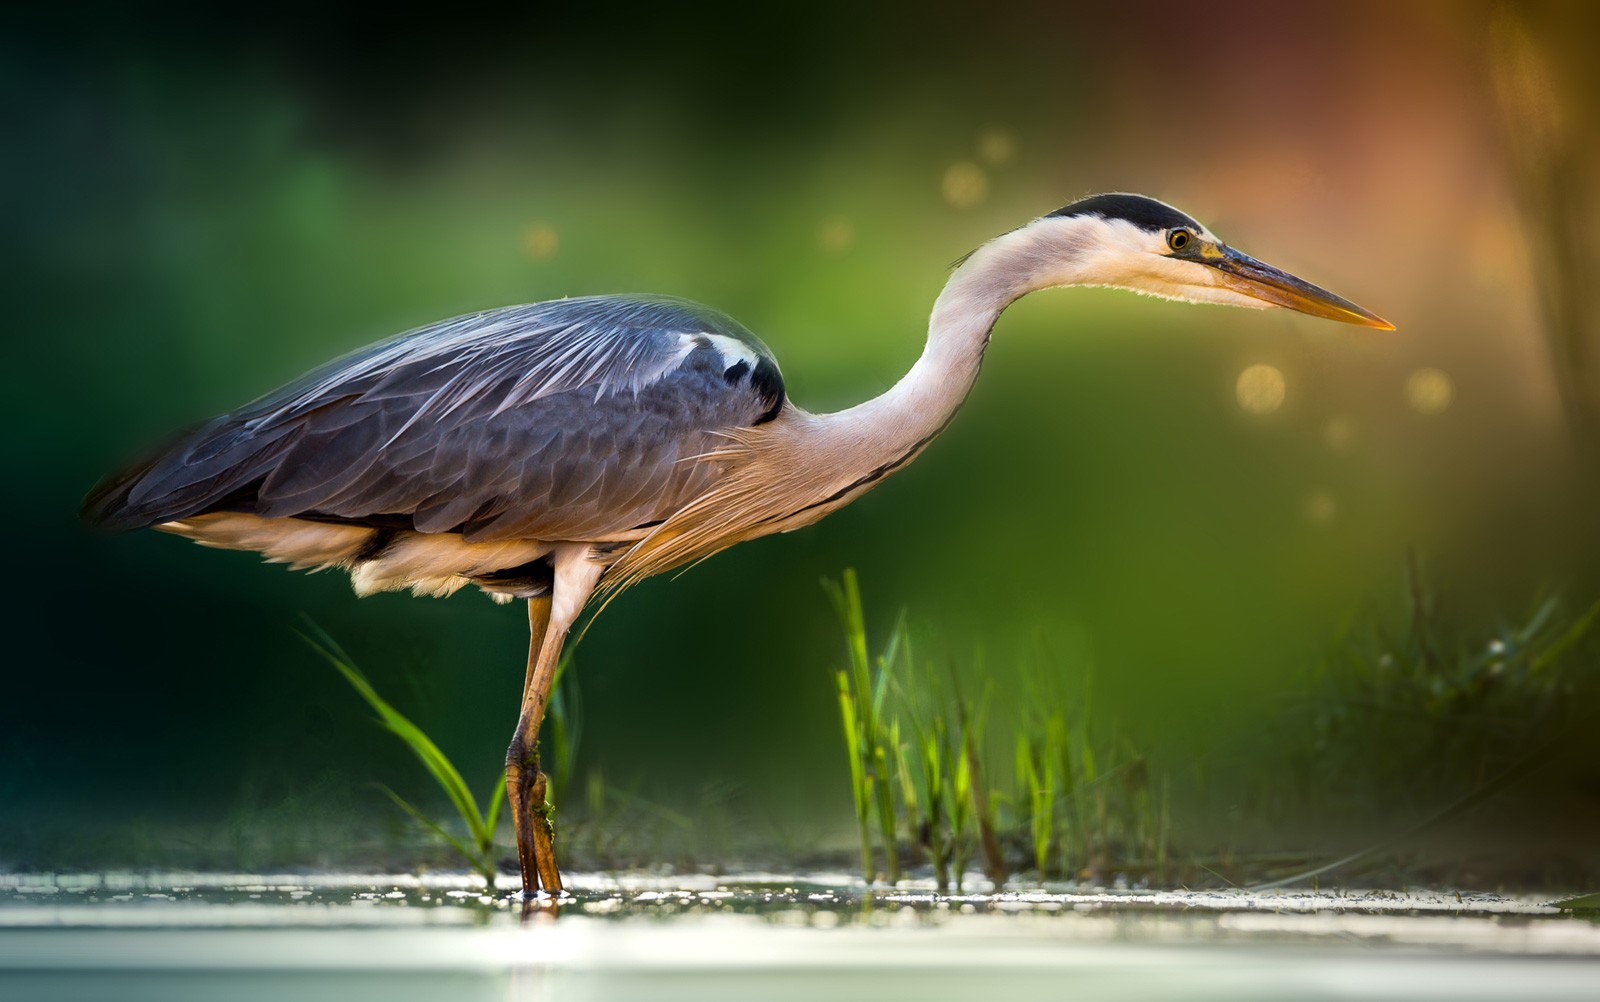 Meaning of the Heron